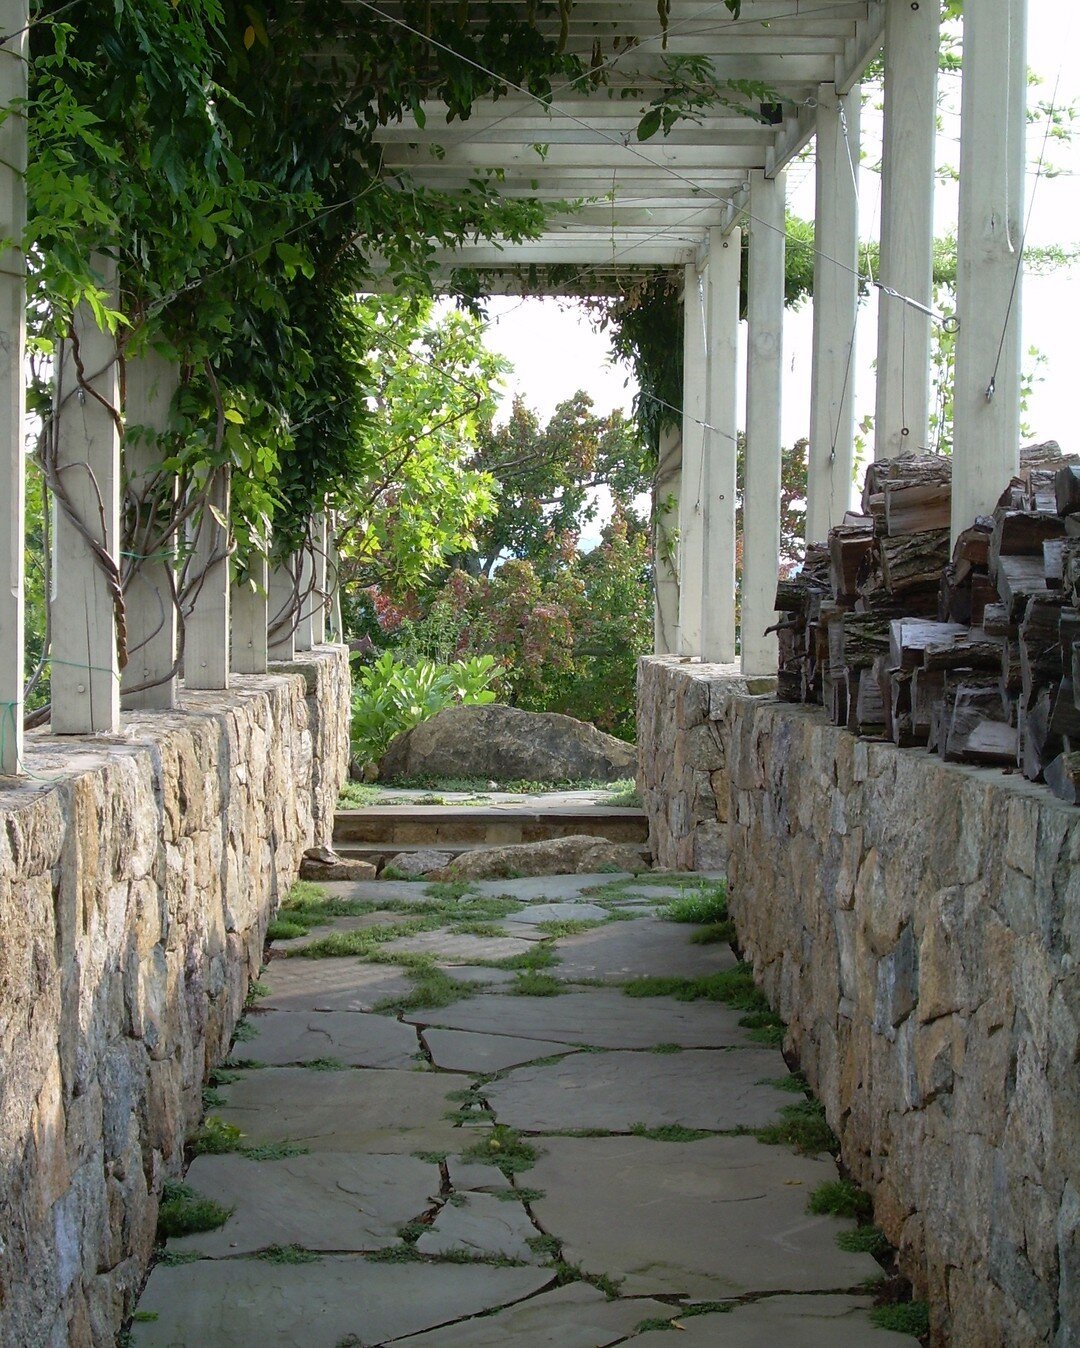 Summertime shadows under the Wisteria arbor at a beloved MVLA residential project.​​​​​​​​
.​​​​​​​​
#LandscapeArchitecture #Wisteria #Arbor #MVLA #Stone #Masonry